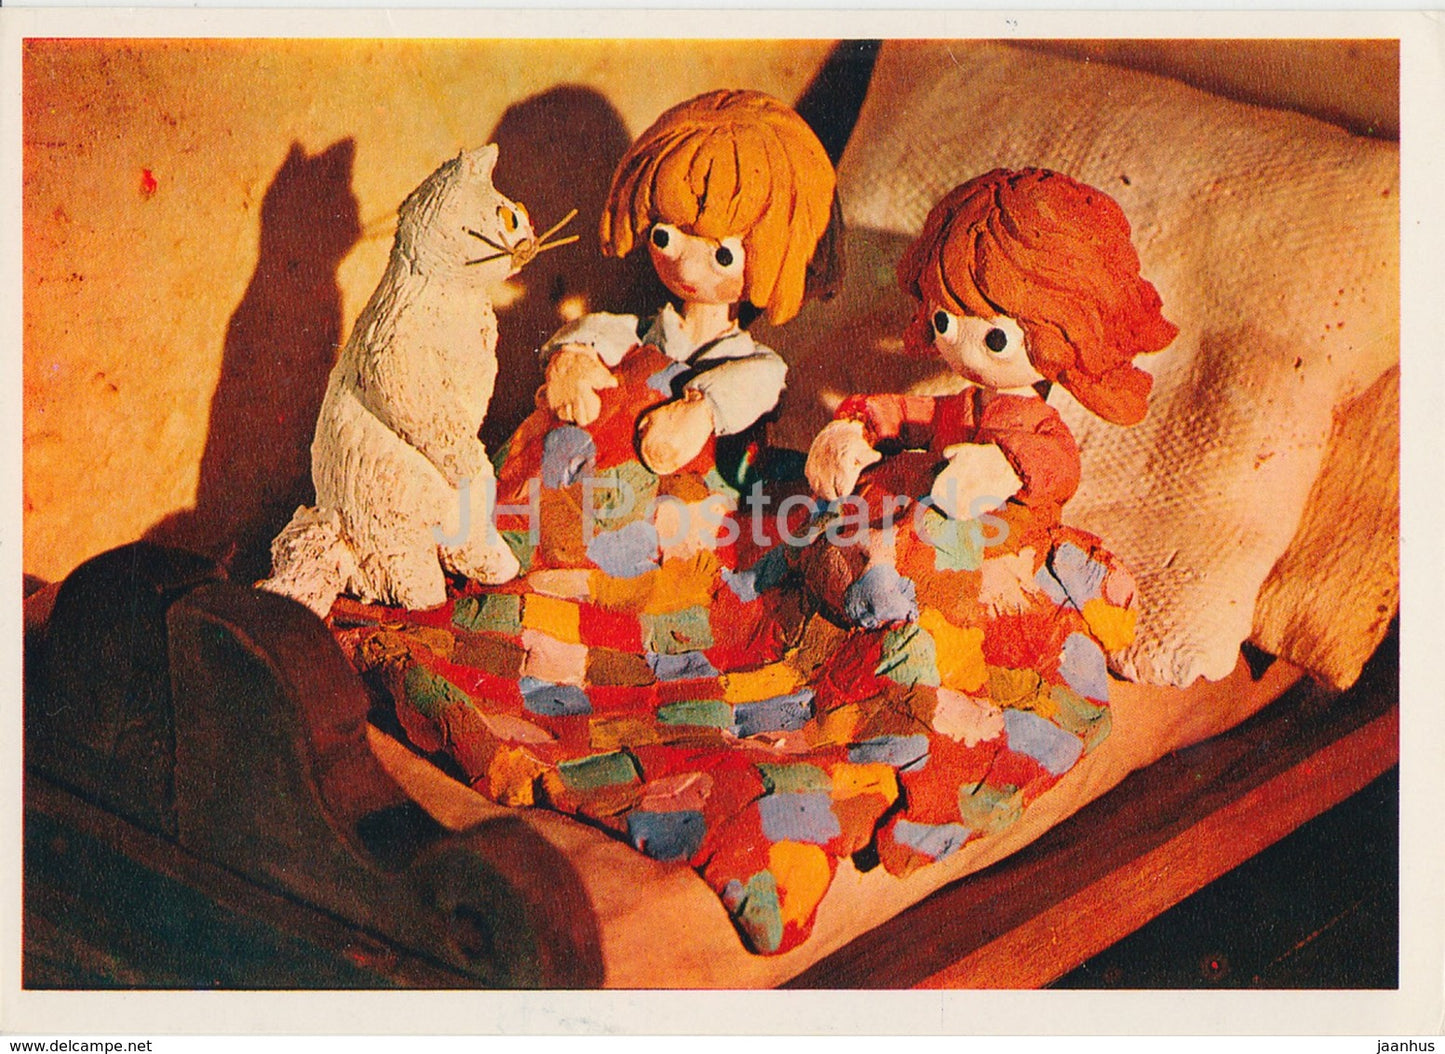 Hansel and Gretel by Brothers Grimm - cat - bed - dolls - Fairy Tale - 1975 - Russia USSR - unused - JH Postcards